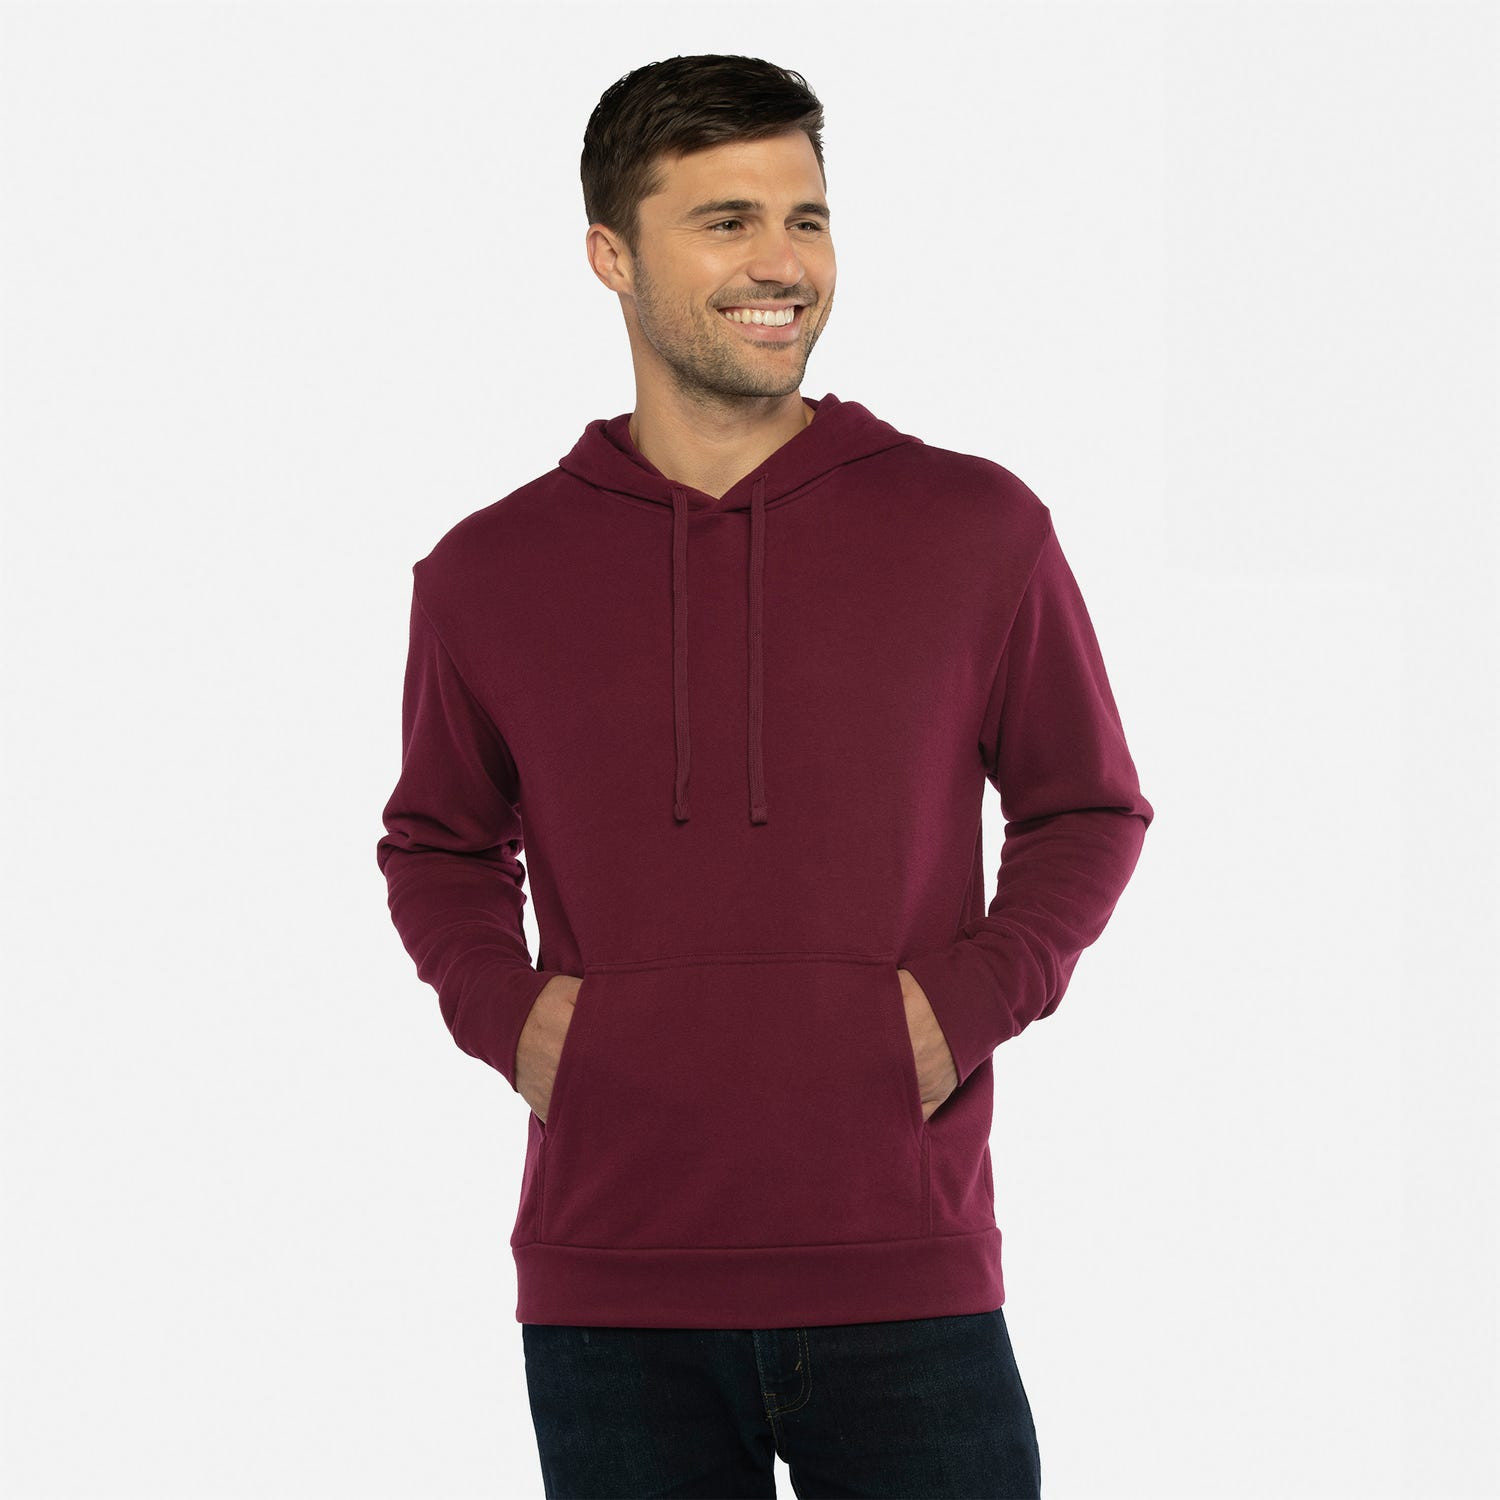 https://cdn11.bigcommerce.com/s-ce94a/images/stencil/1500x1500/products/2918/40614/9304-next-level-hoodie-blankclothing.ca-maroon__76358.1686410081.jpg?c=2&imbypass=on